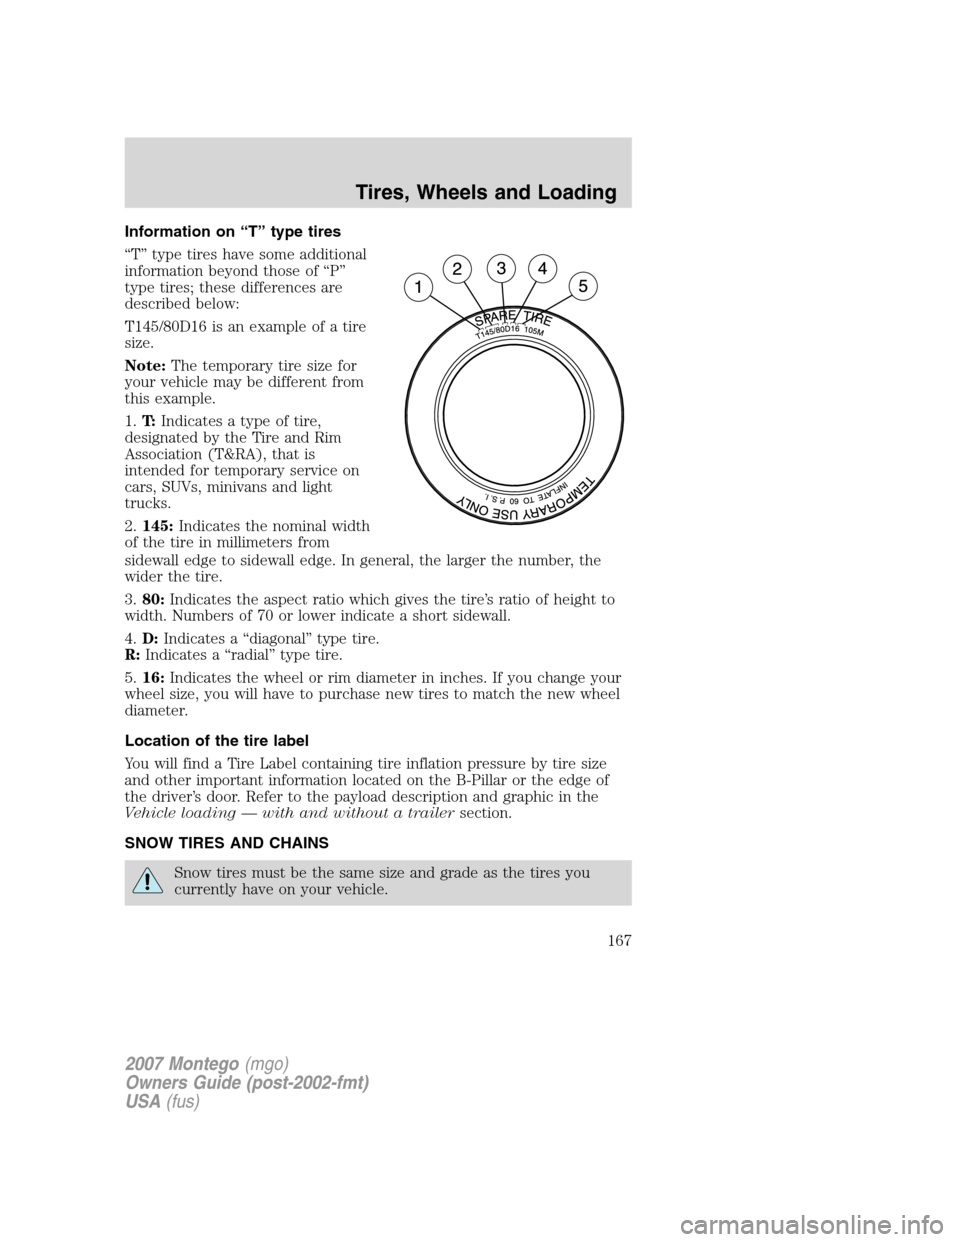 Mercury Montego 2007  Owners Manuals Information on “T” type tires
“T” type tires have some additional
information beyond those of “P”
type tires; these differences are
described below:
T145/80D16 is an example of a tire
size